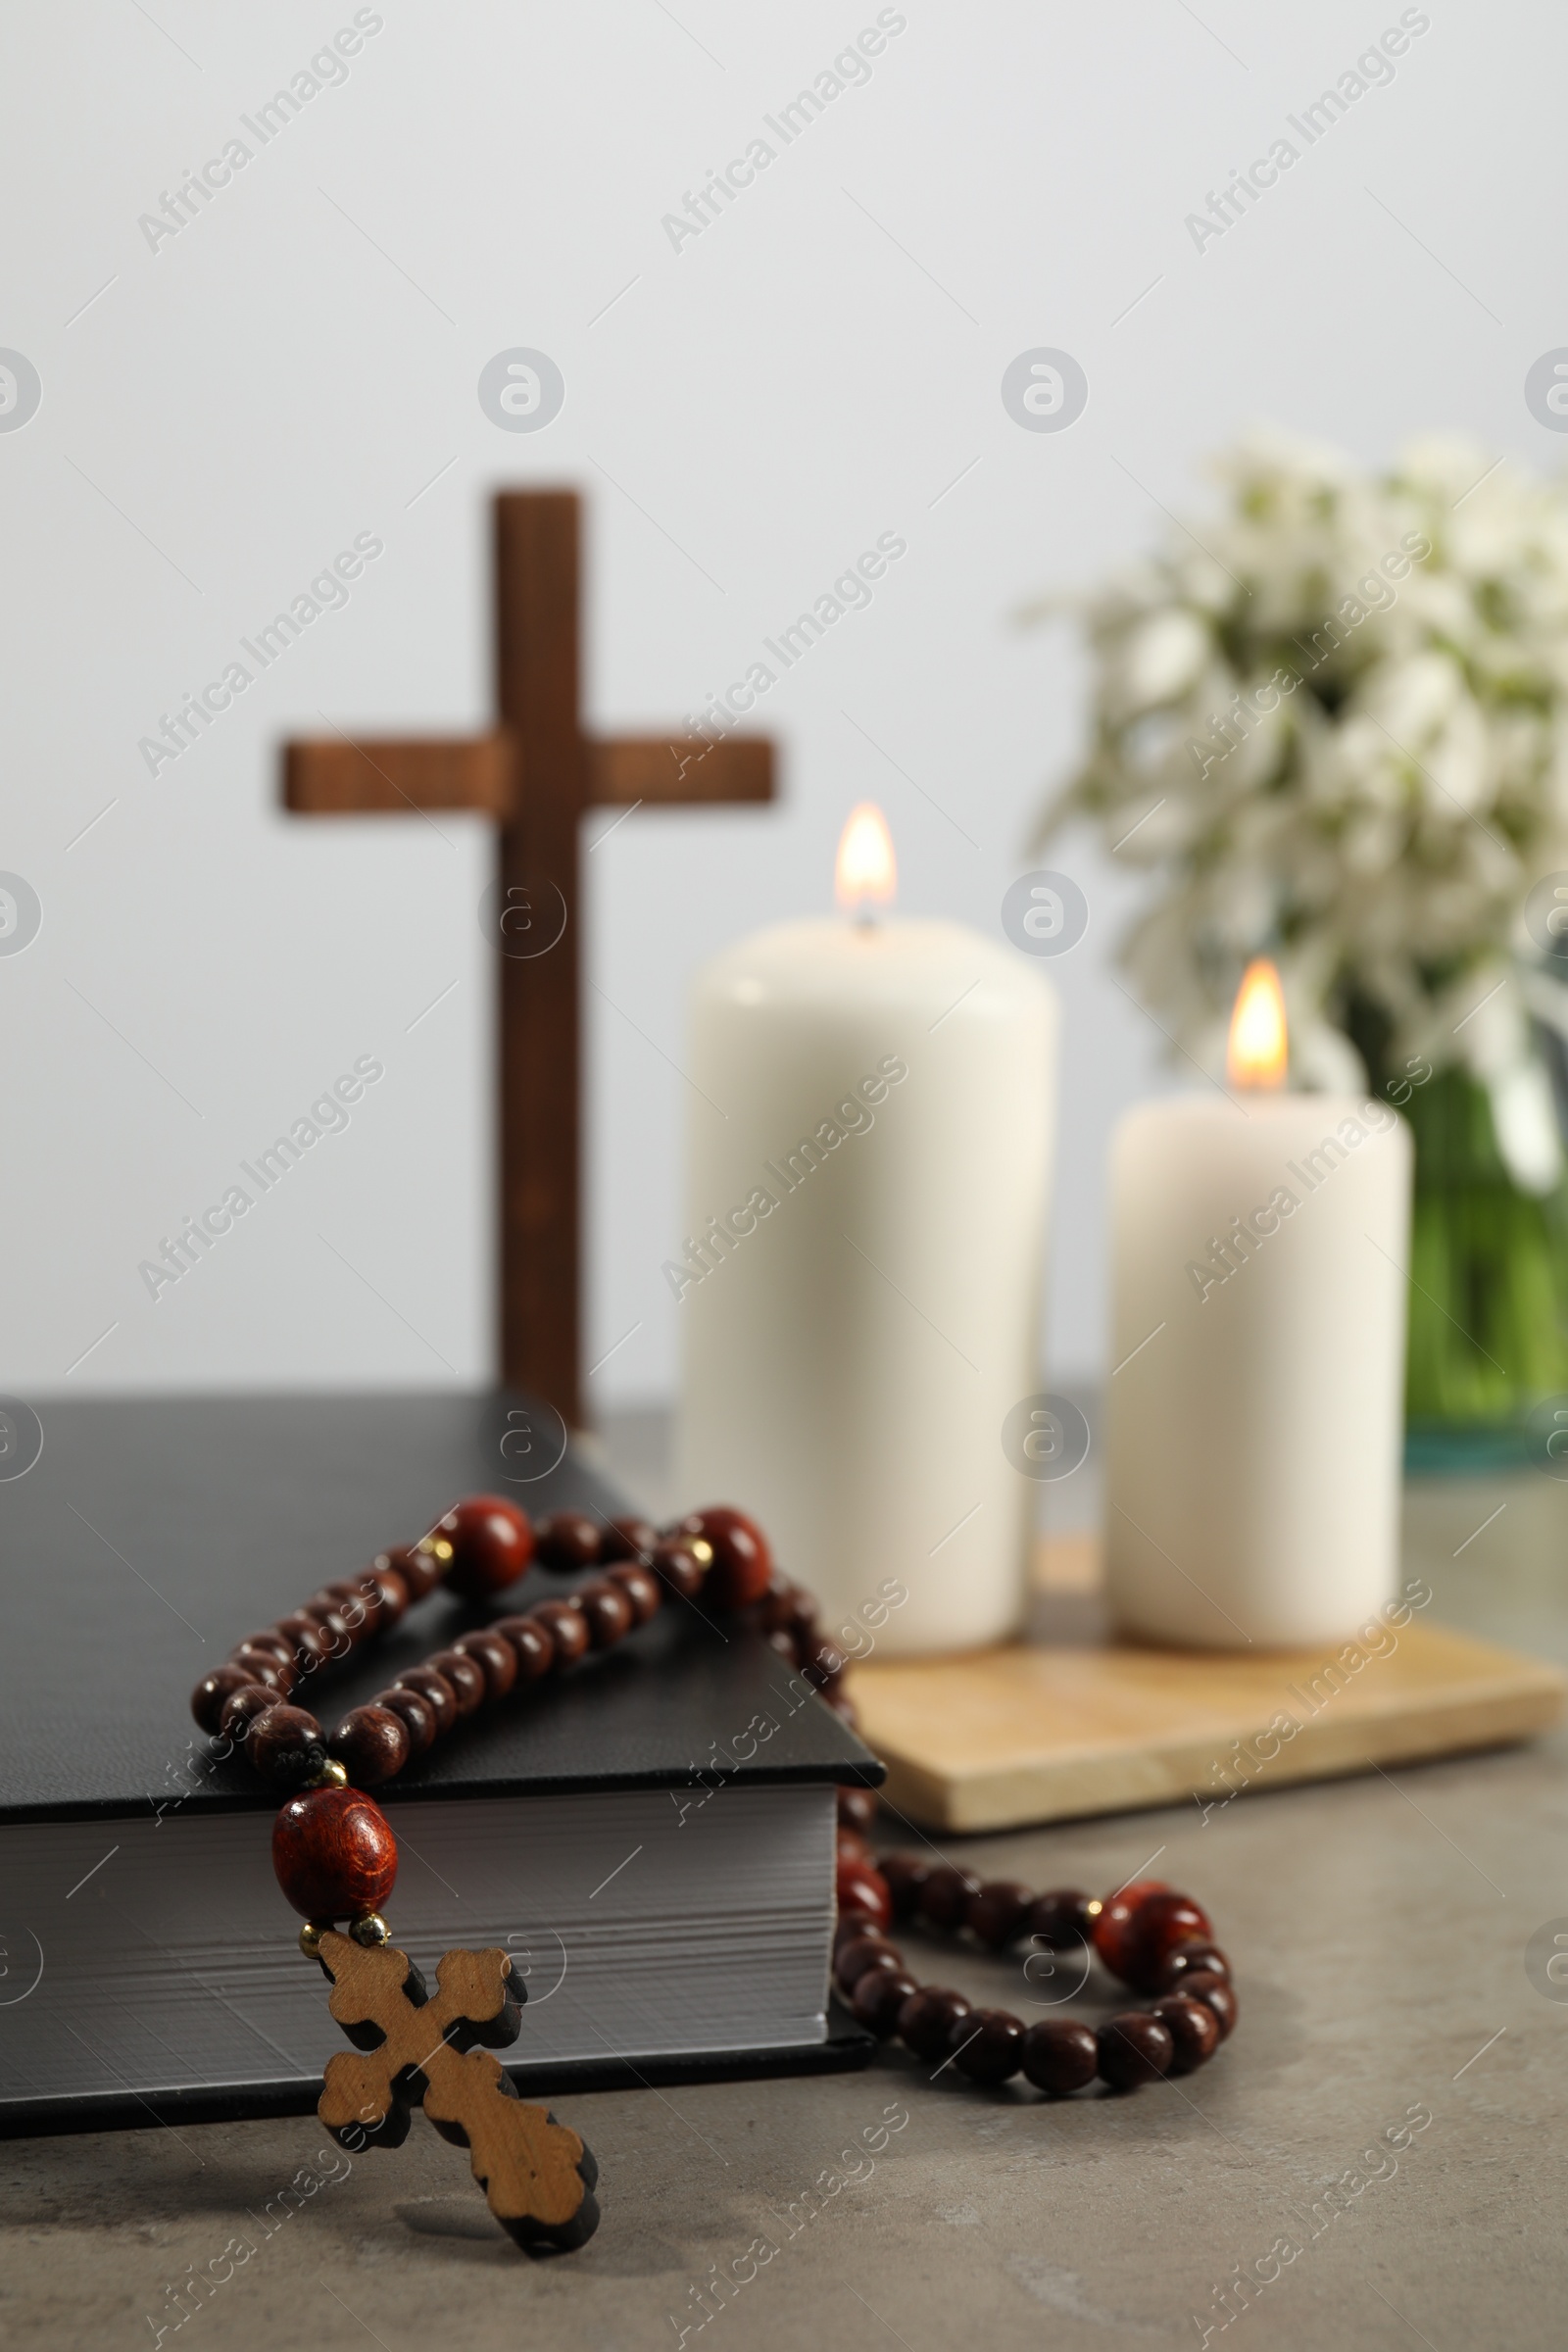 Photo of Bible, rosary beads, wooden cross and church candles on grey table